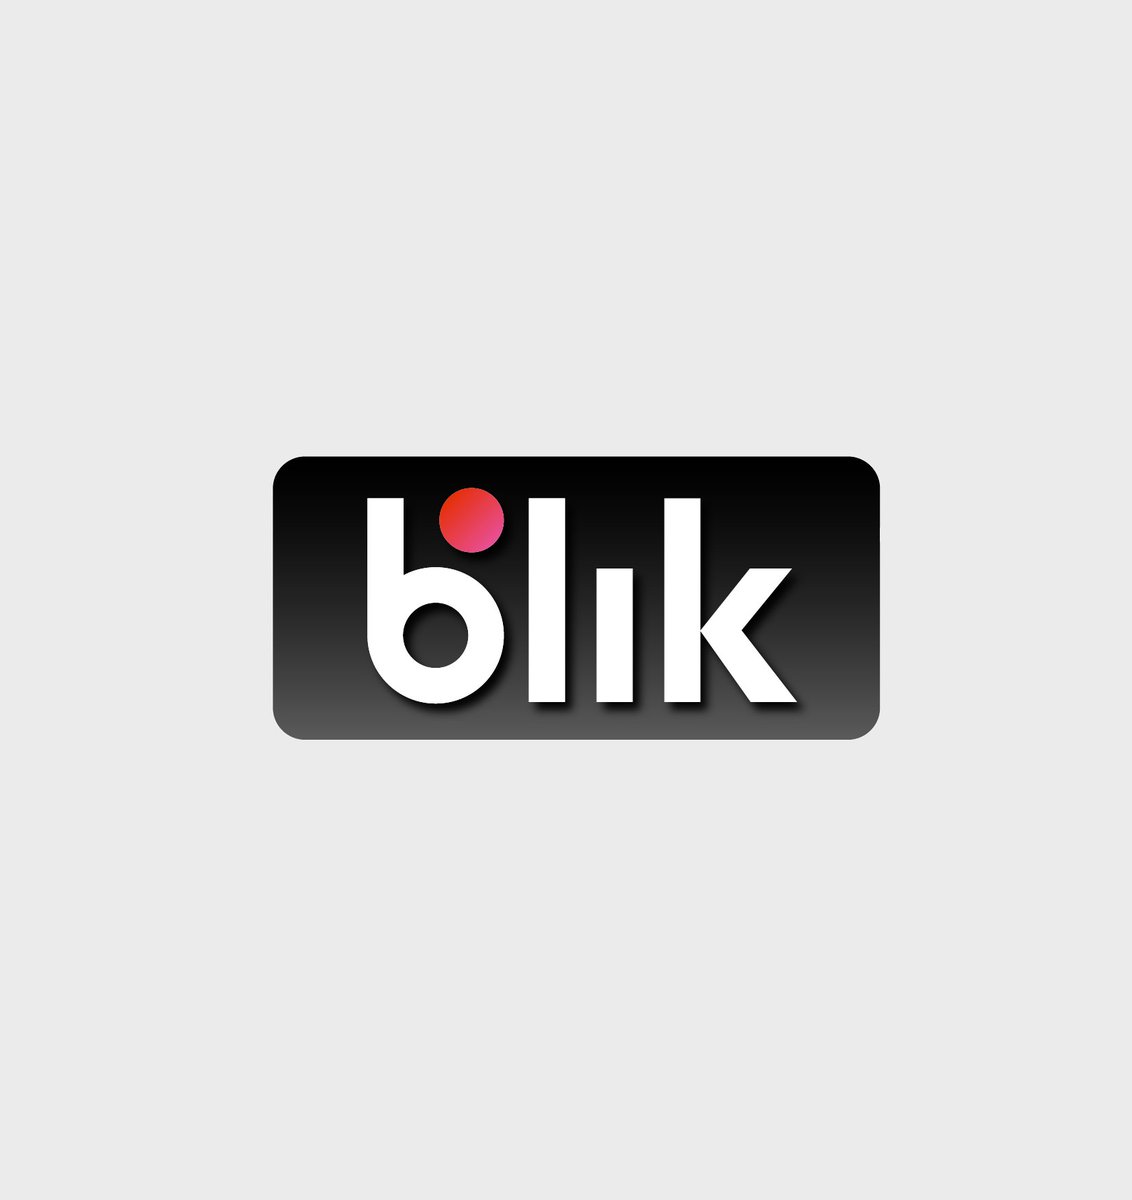 Point-of-sale transactions surged by 94% and BLIK transfers jumped by 88% compared to last year. In Q1 alone, it averaged 4.2 million transactions per day, marking a 55% growth from 2022. #MobilePayments #BLIKBoom